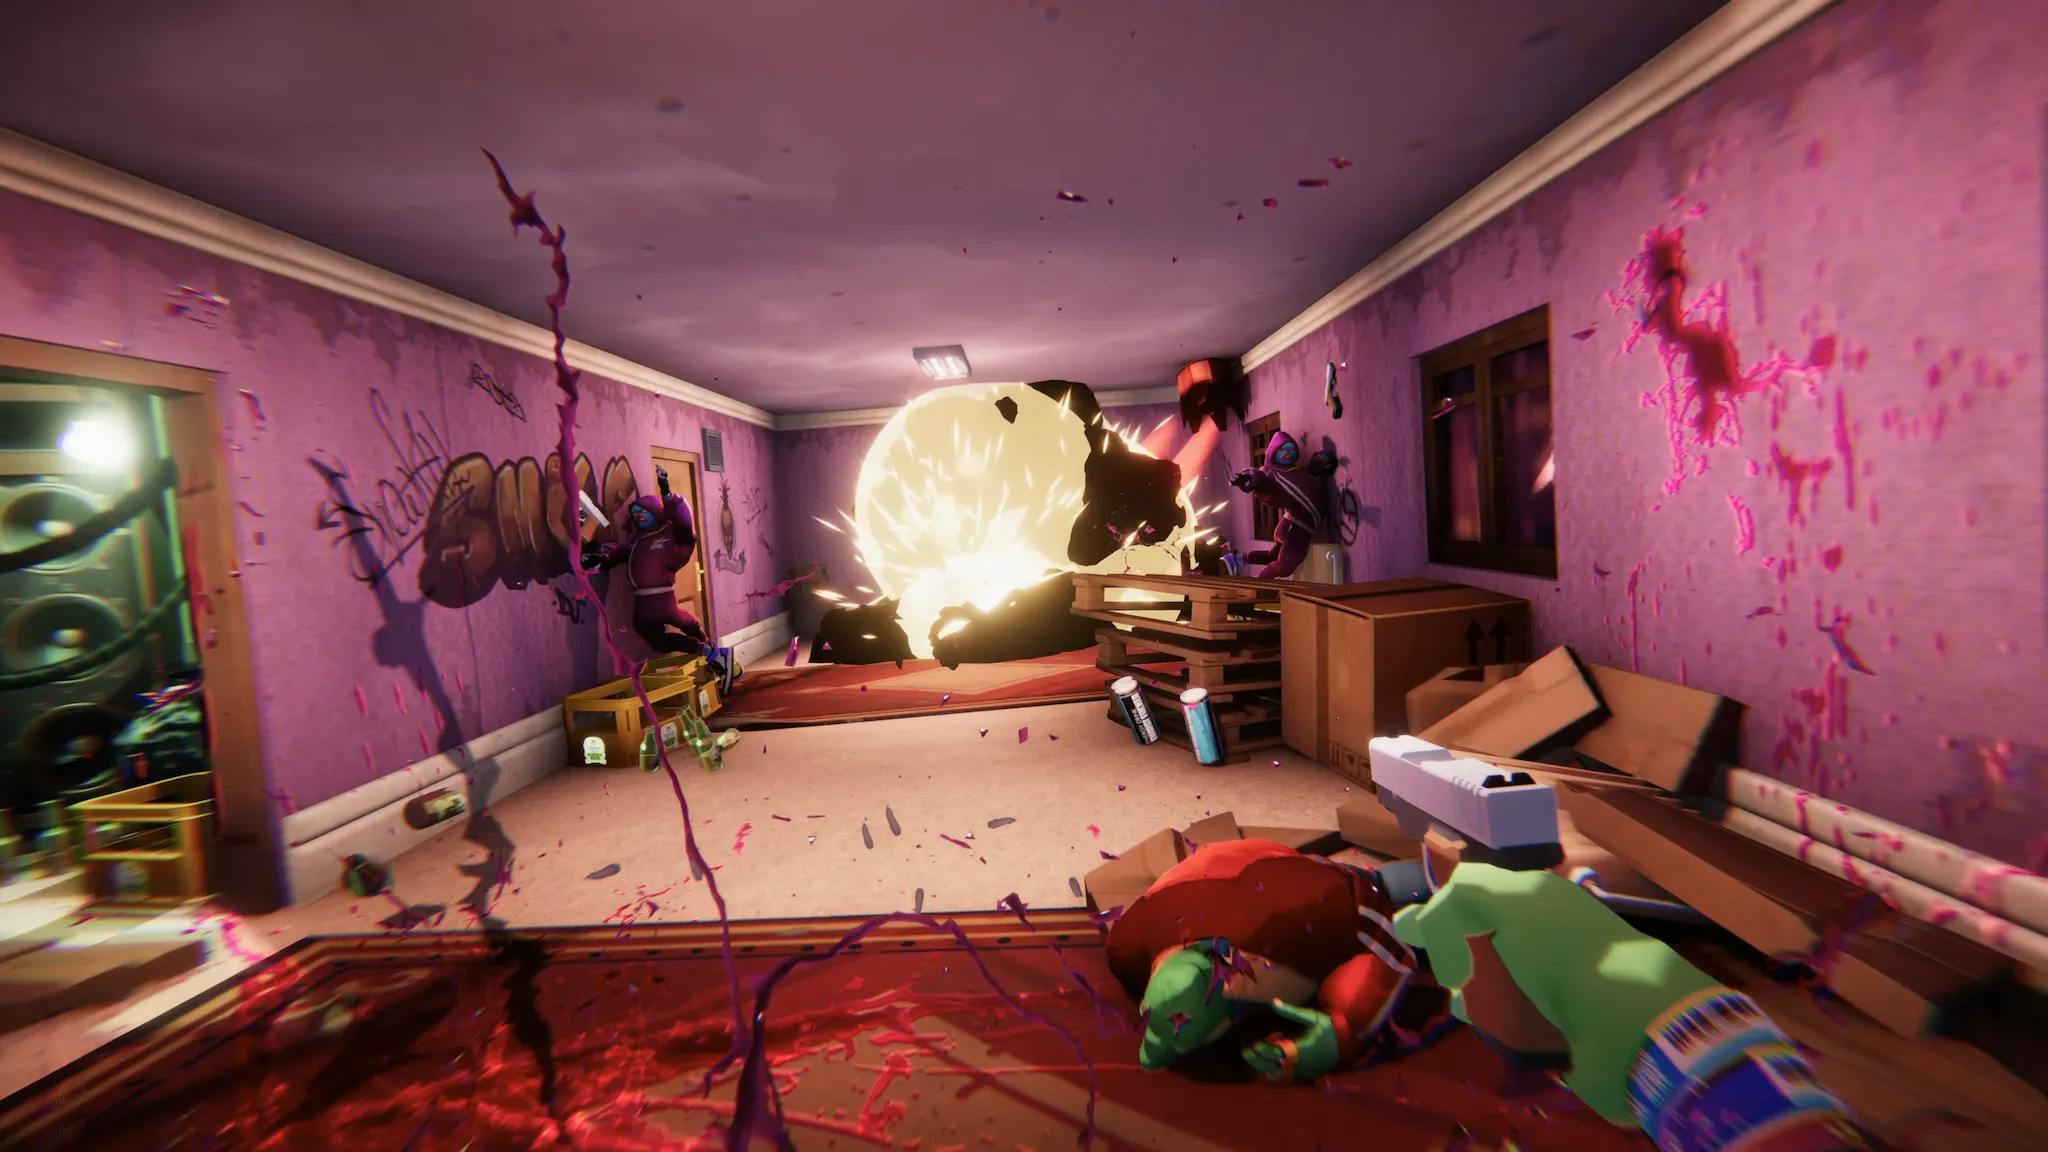 Anger foot screenshot of a blood splattered room. You have a gun in your right hand and are shooting into the back of the room, causing an explosion. 